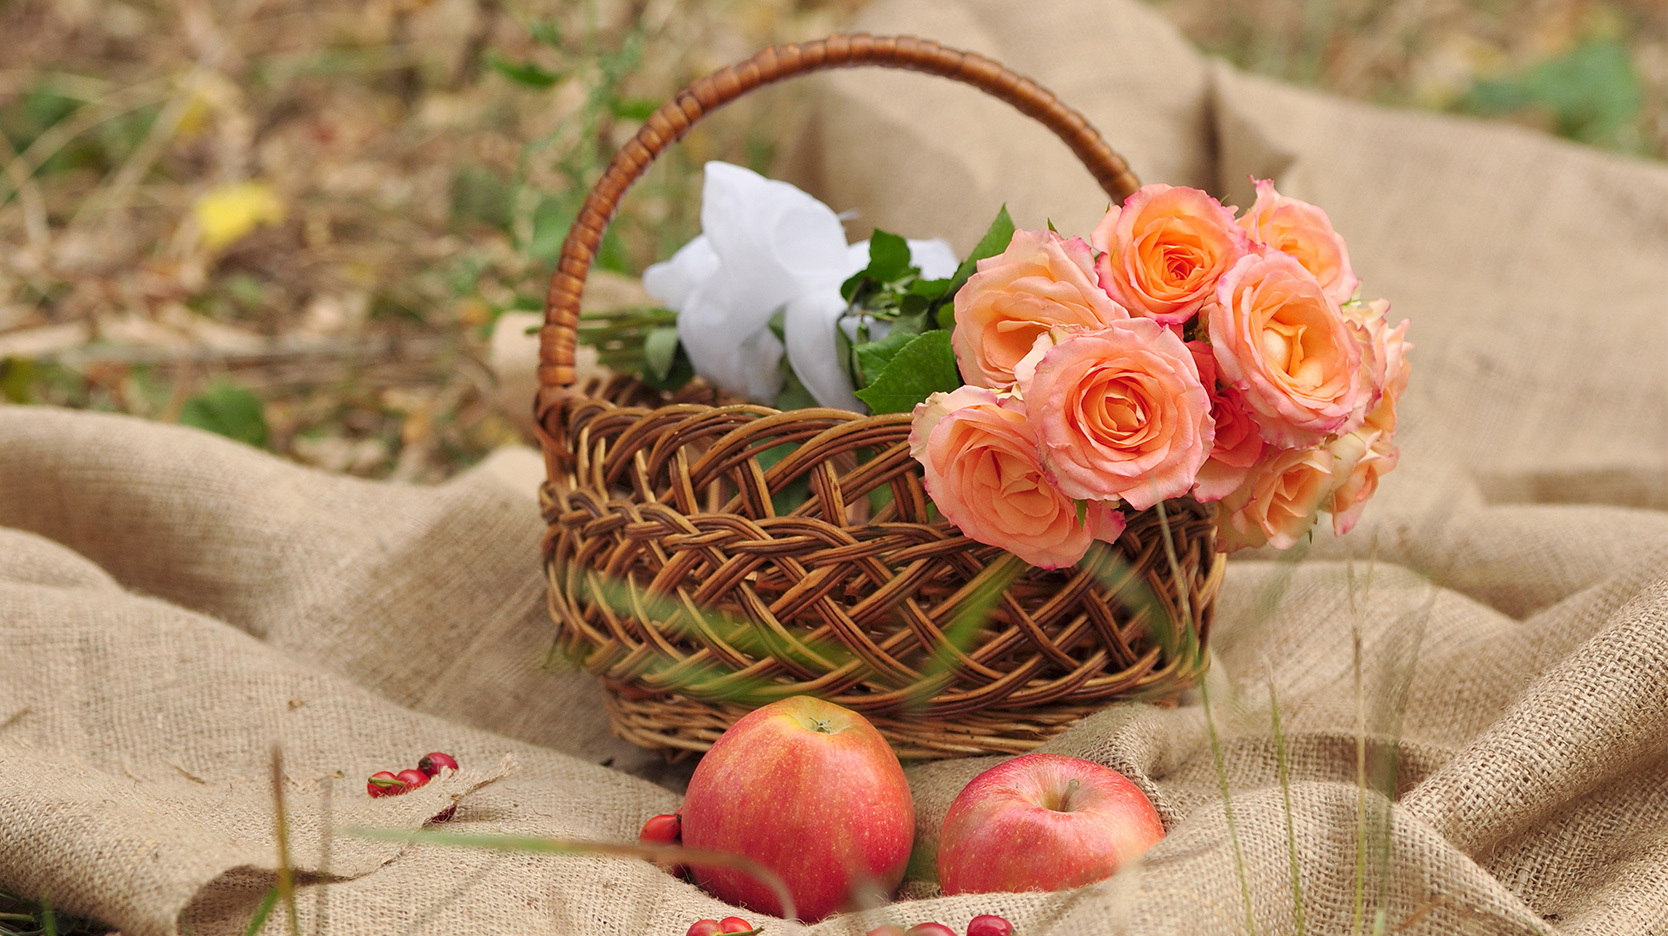 Apple and Roses in a Basket